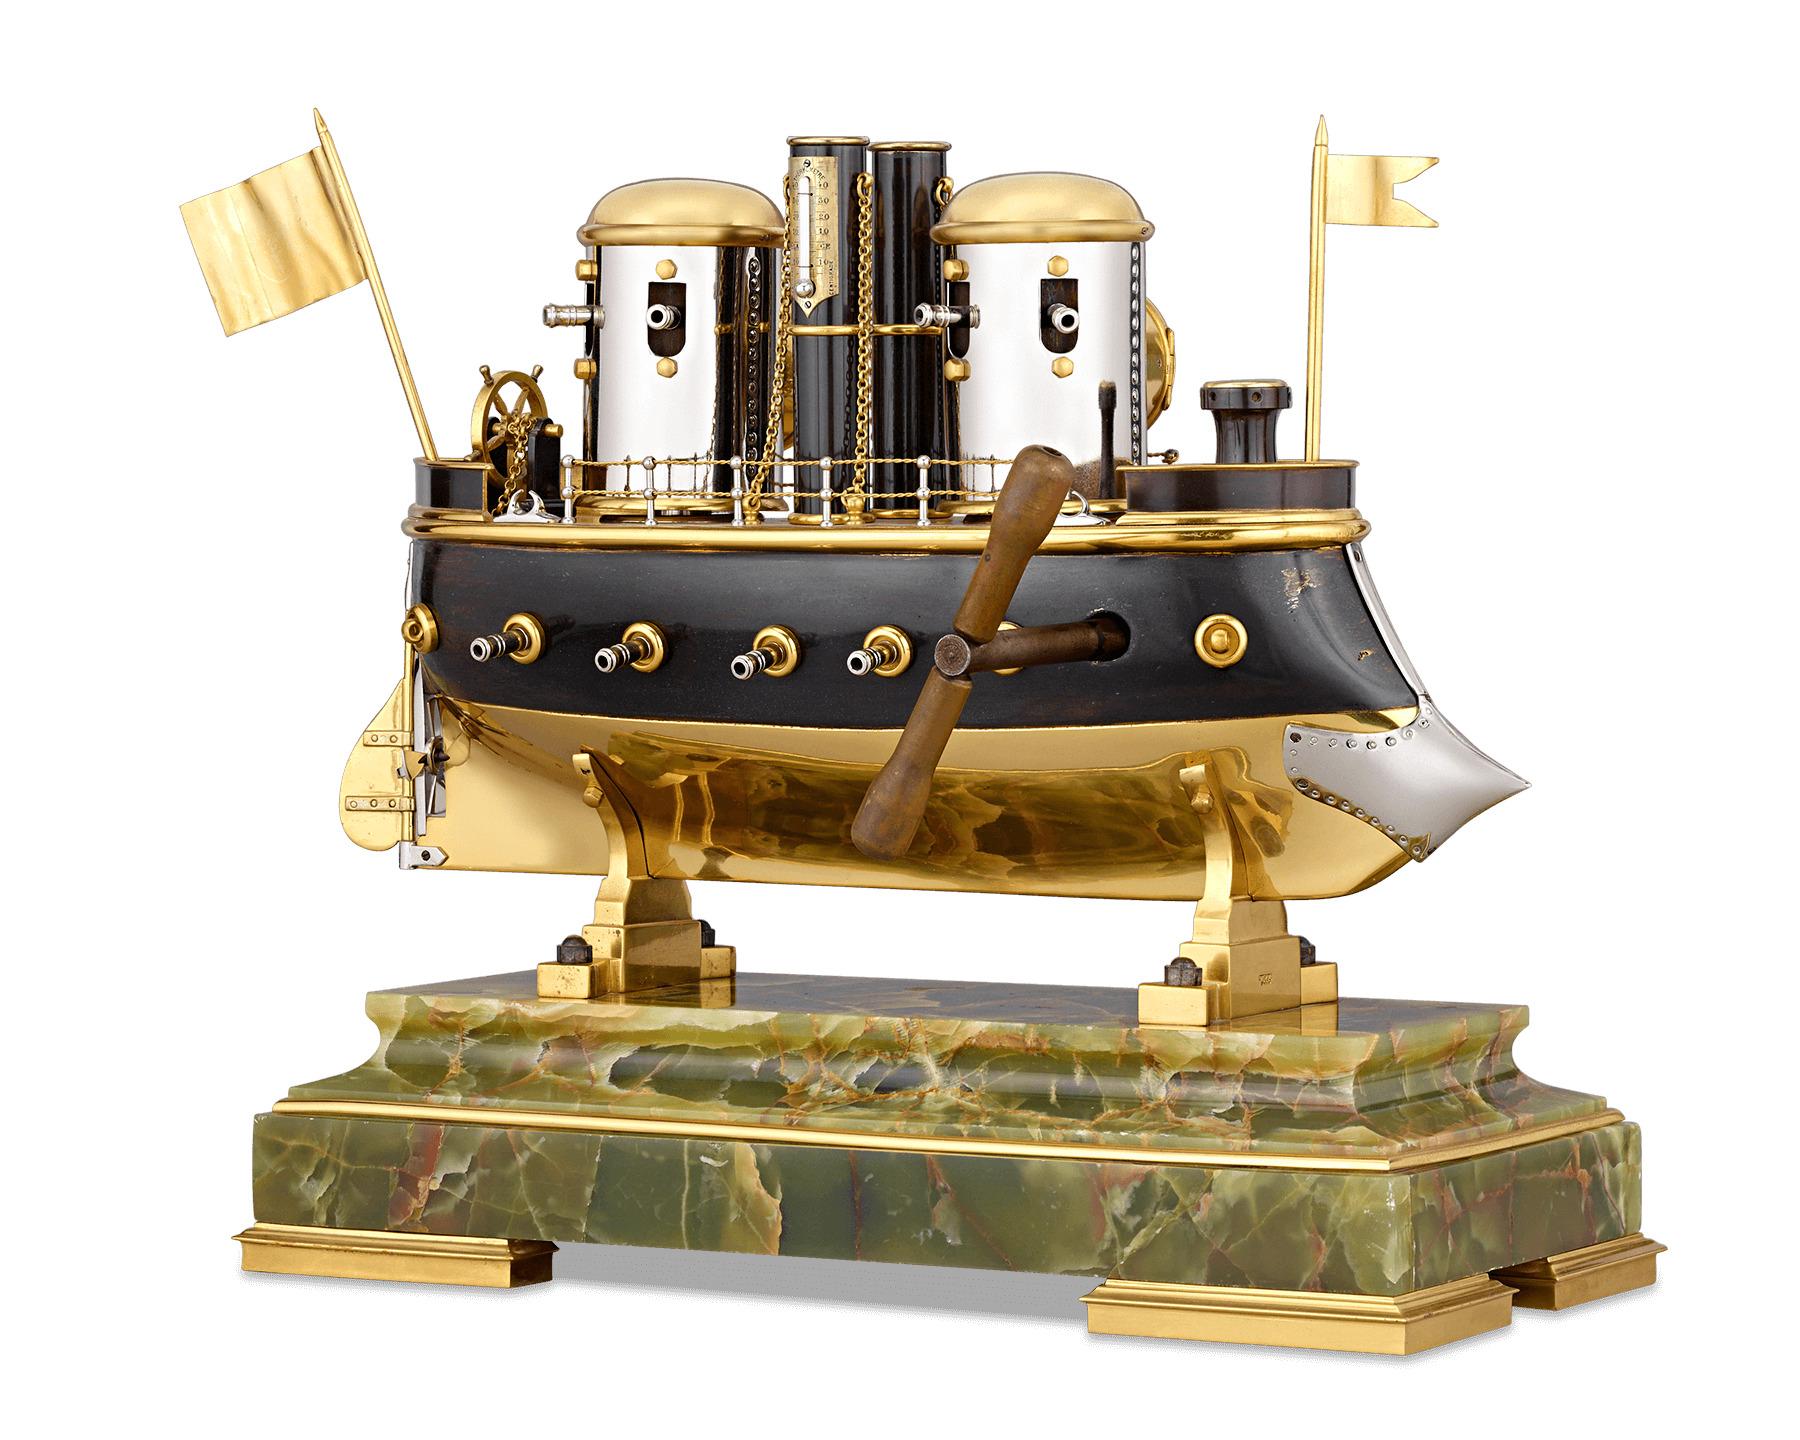 This automaton battleship clock is an impeccable example of the complex artistry of Industrial timepieces. An automaton is incorporated into the ship's form, with a separate mechanism that causes the propeller to spin and turrets to rotate 360